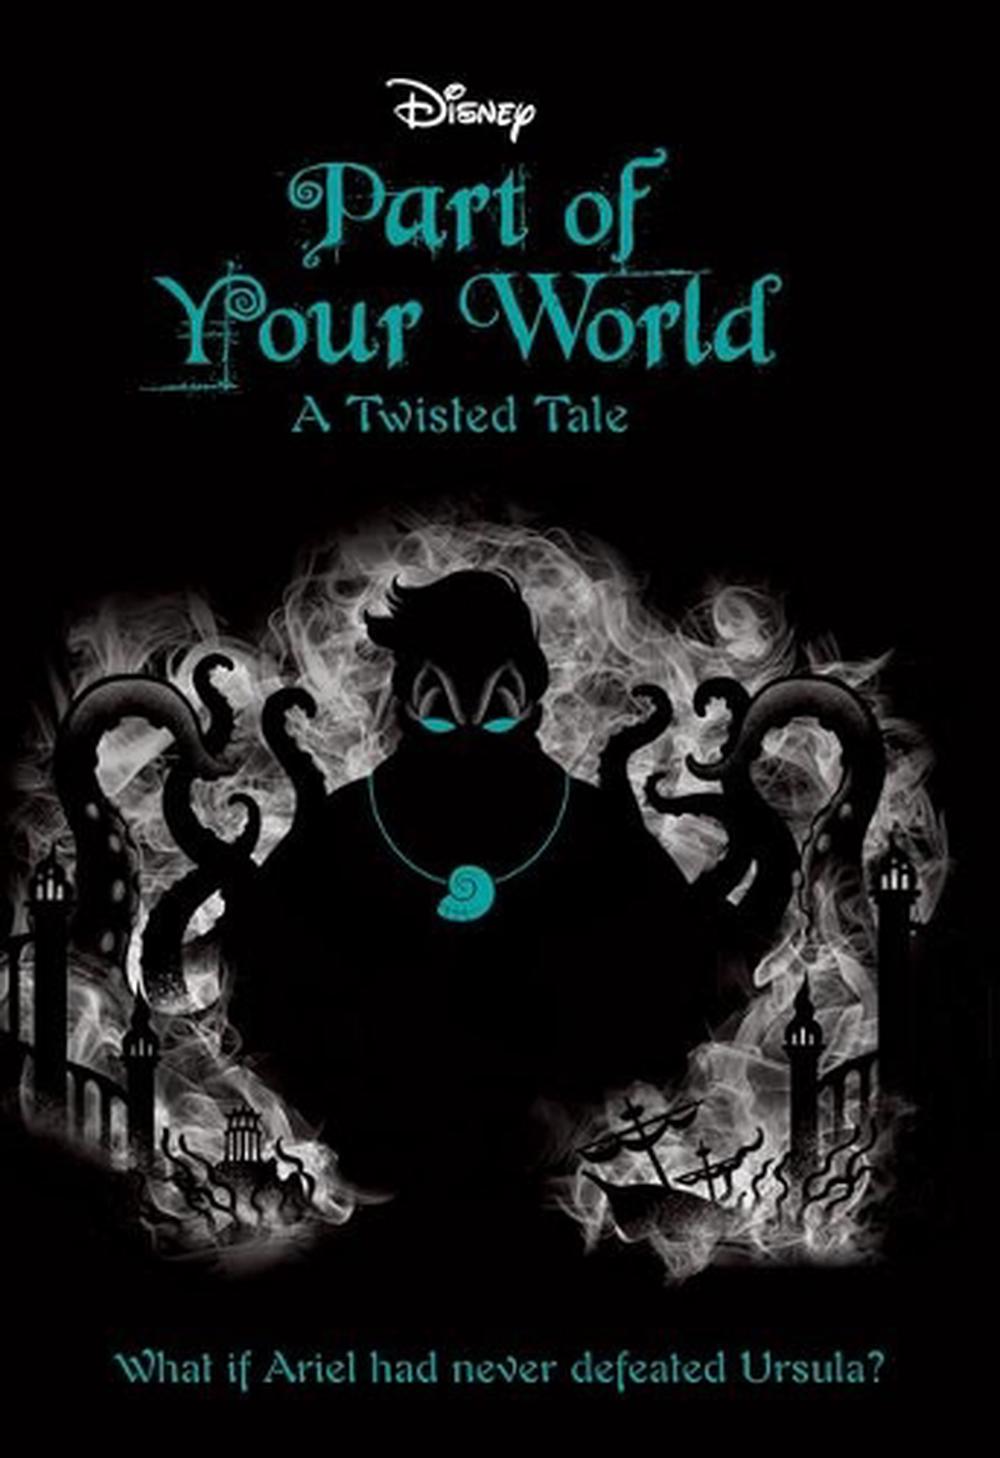 a twisted tale book series